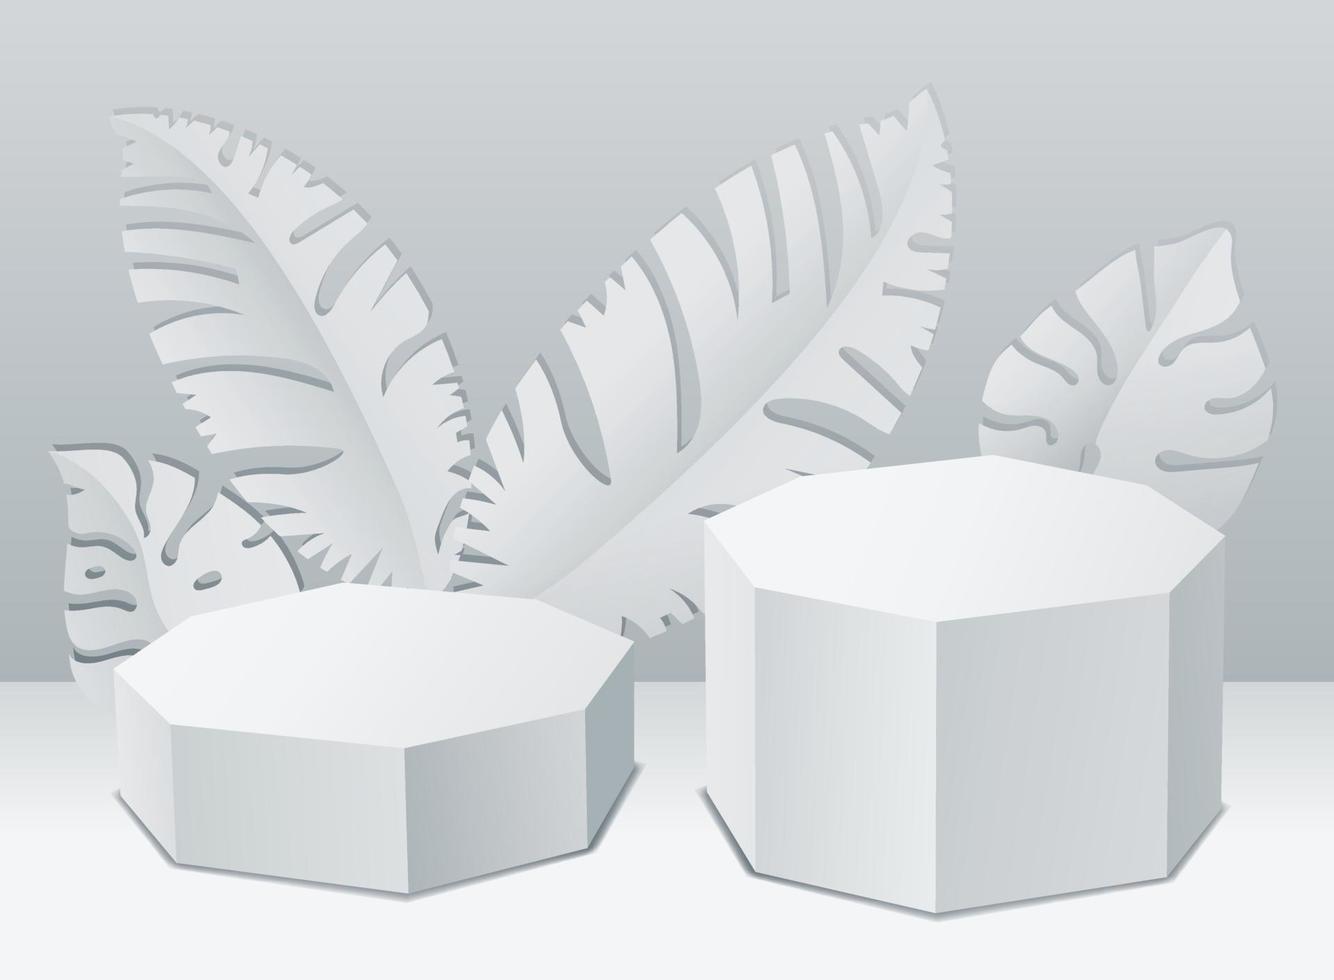 2 octangonal mockup podiums with leaves for product presentation on white color background vector